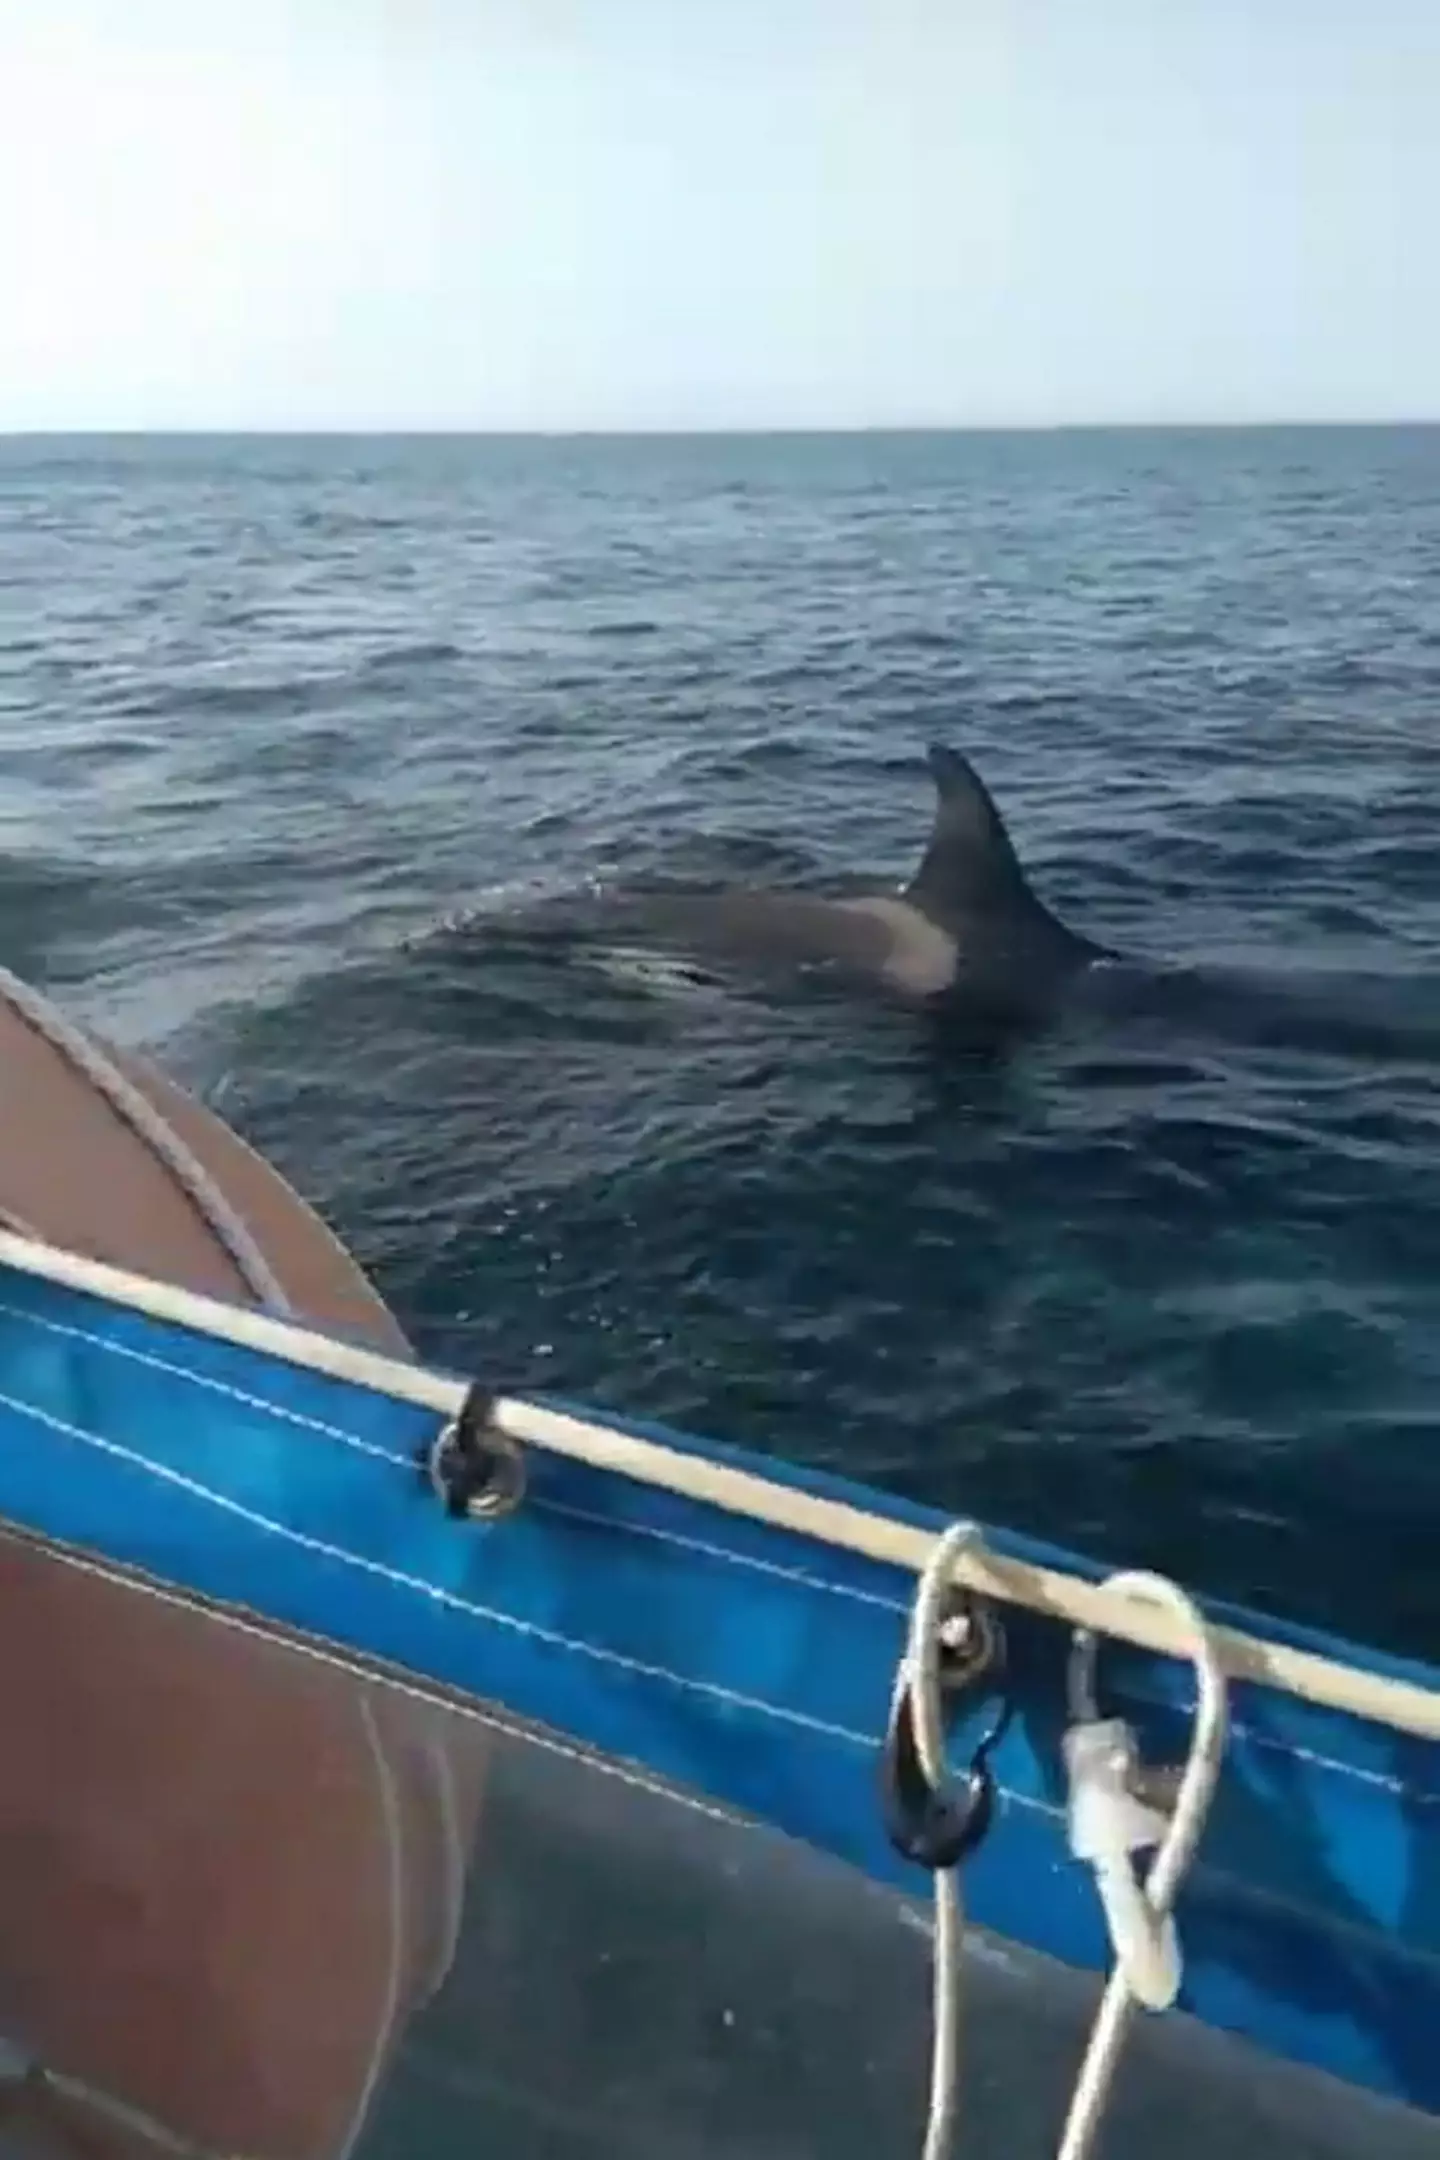 French sailor Phep Philouceros captured his run-in with the orcas on video.